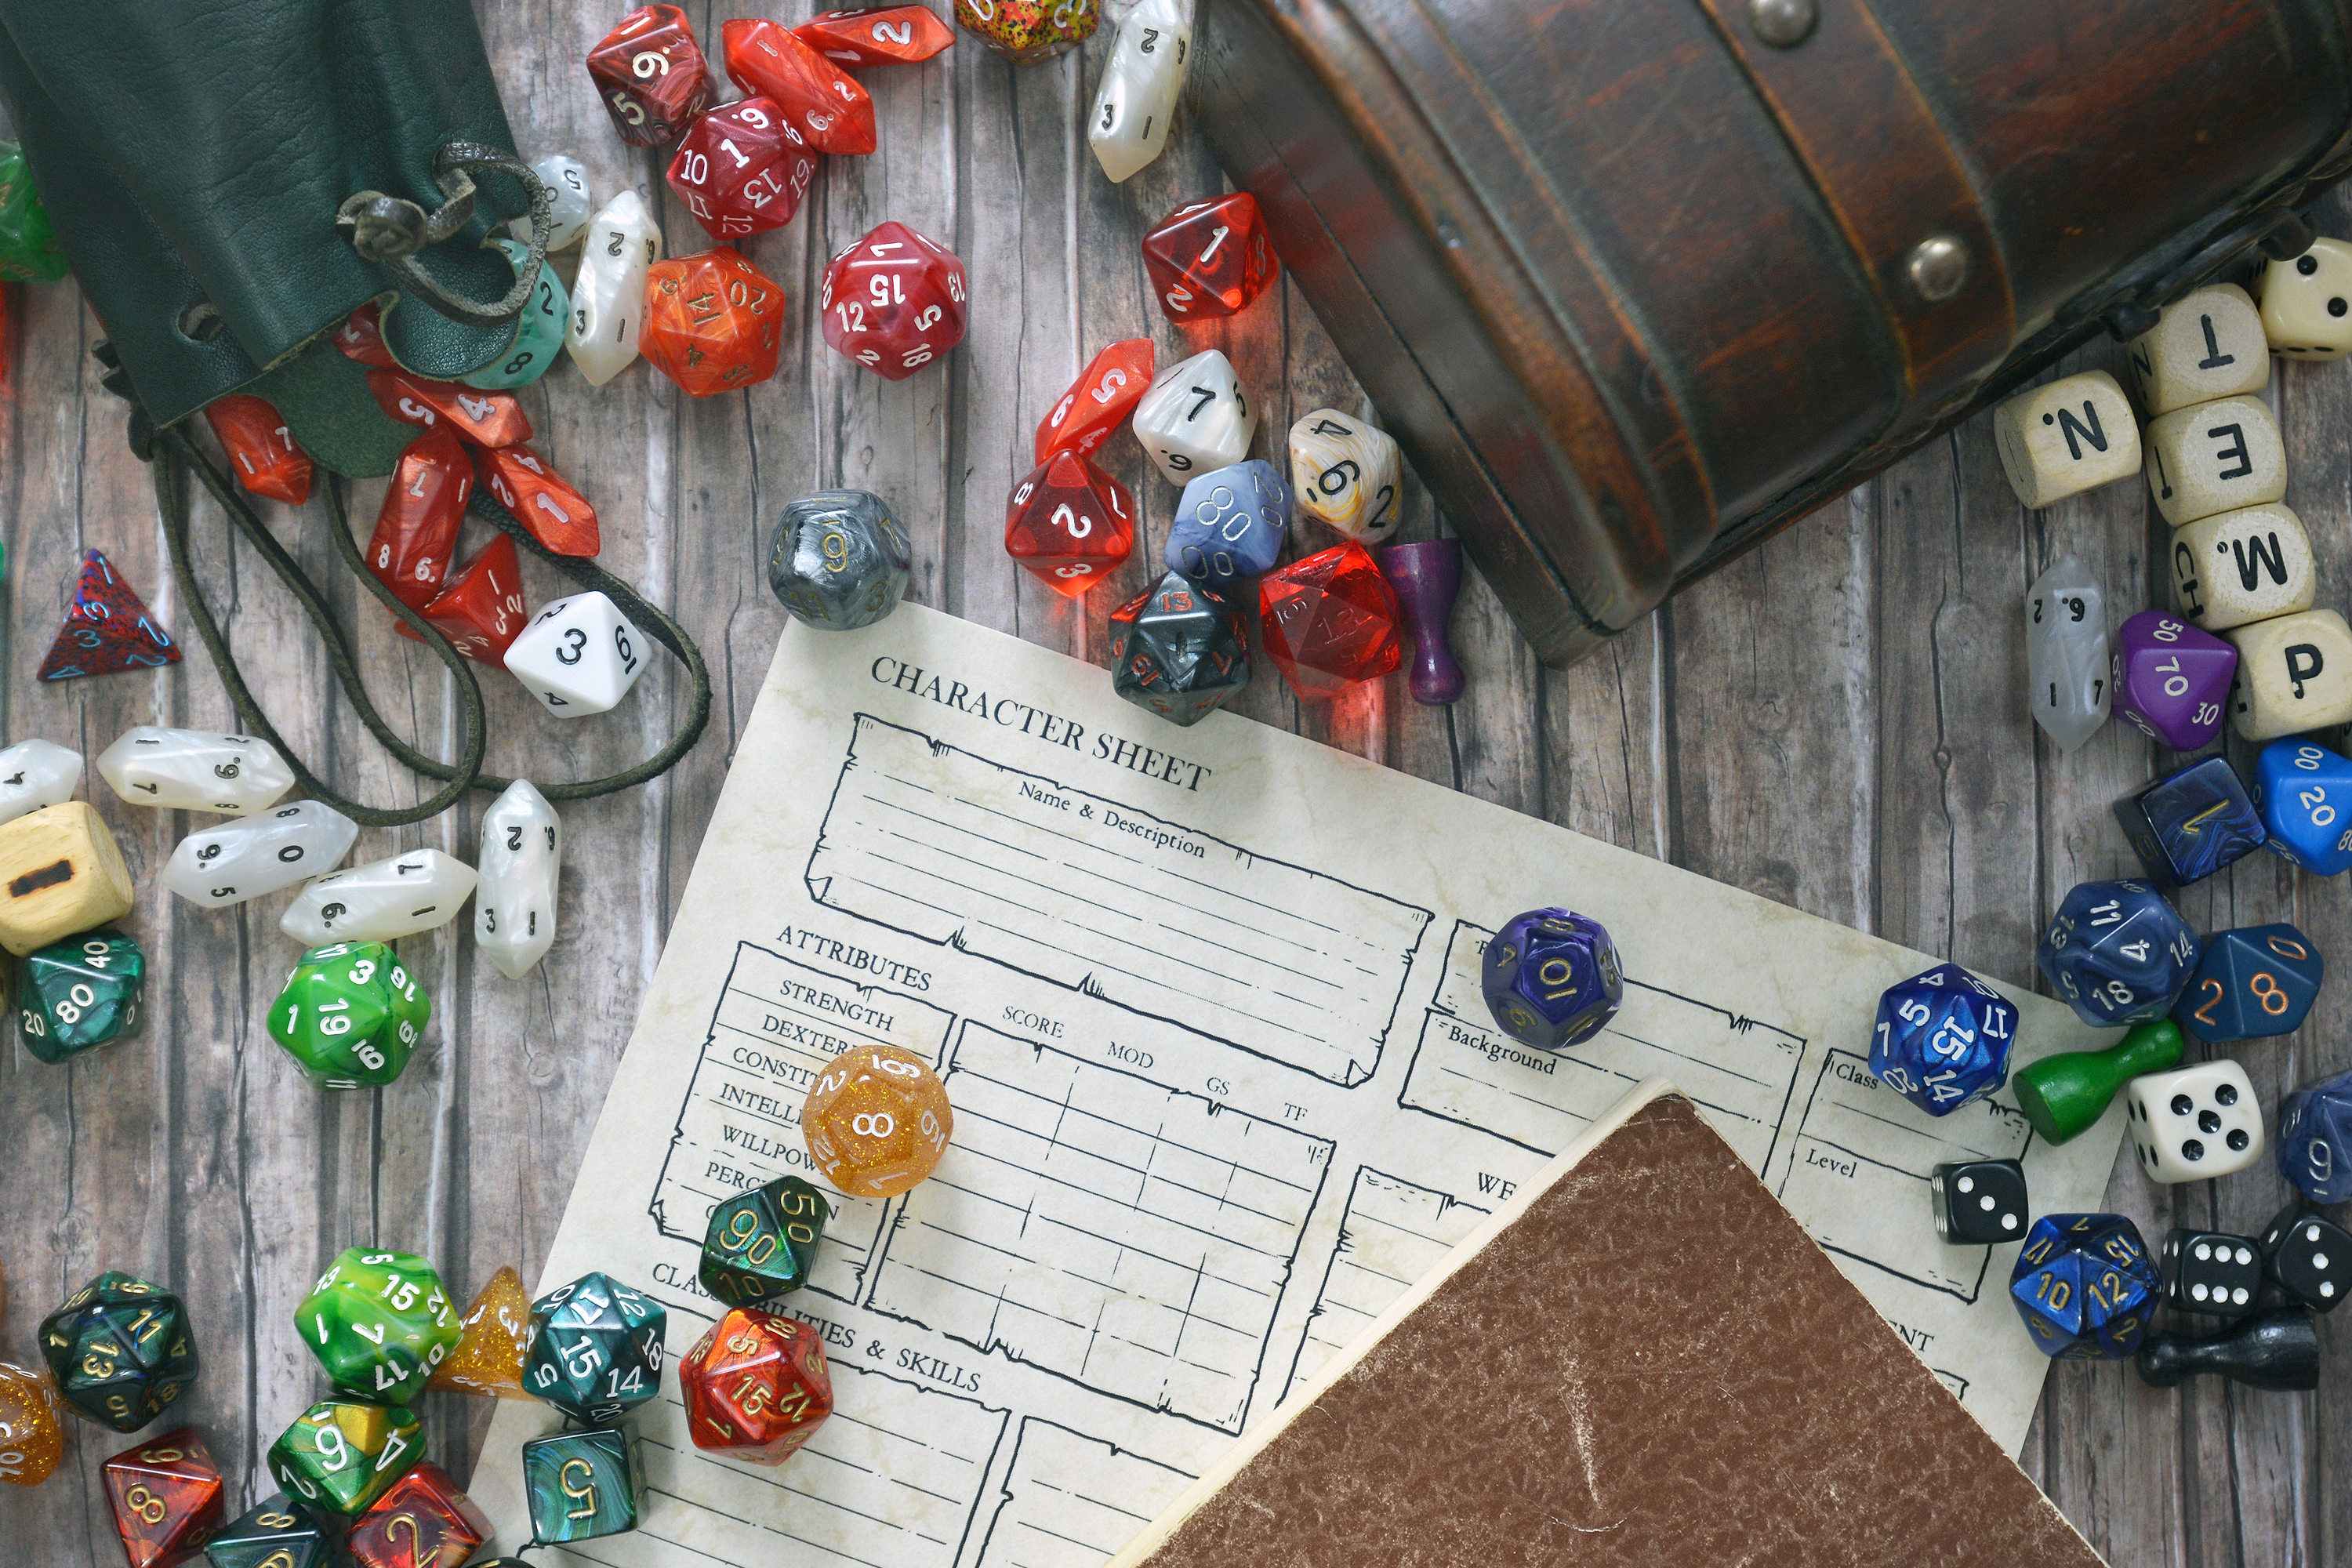 Tabletop role playing flat lay with colorful RPG and game dices, character sheet, rule book and treasure chest on wooden desk